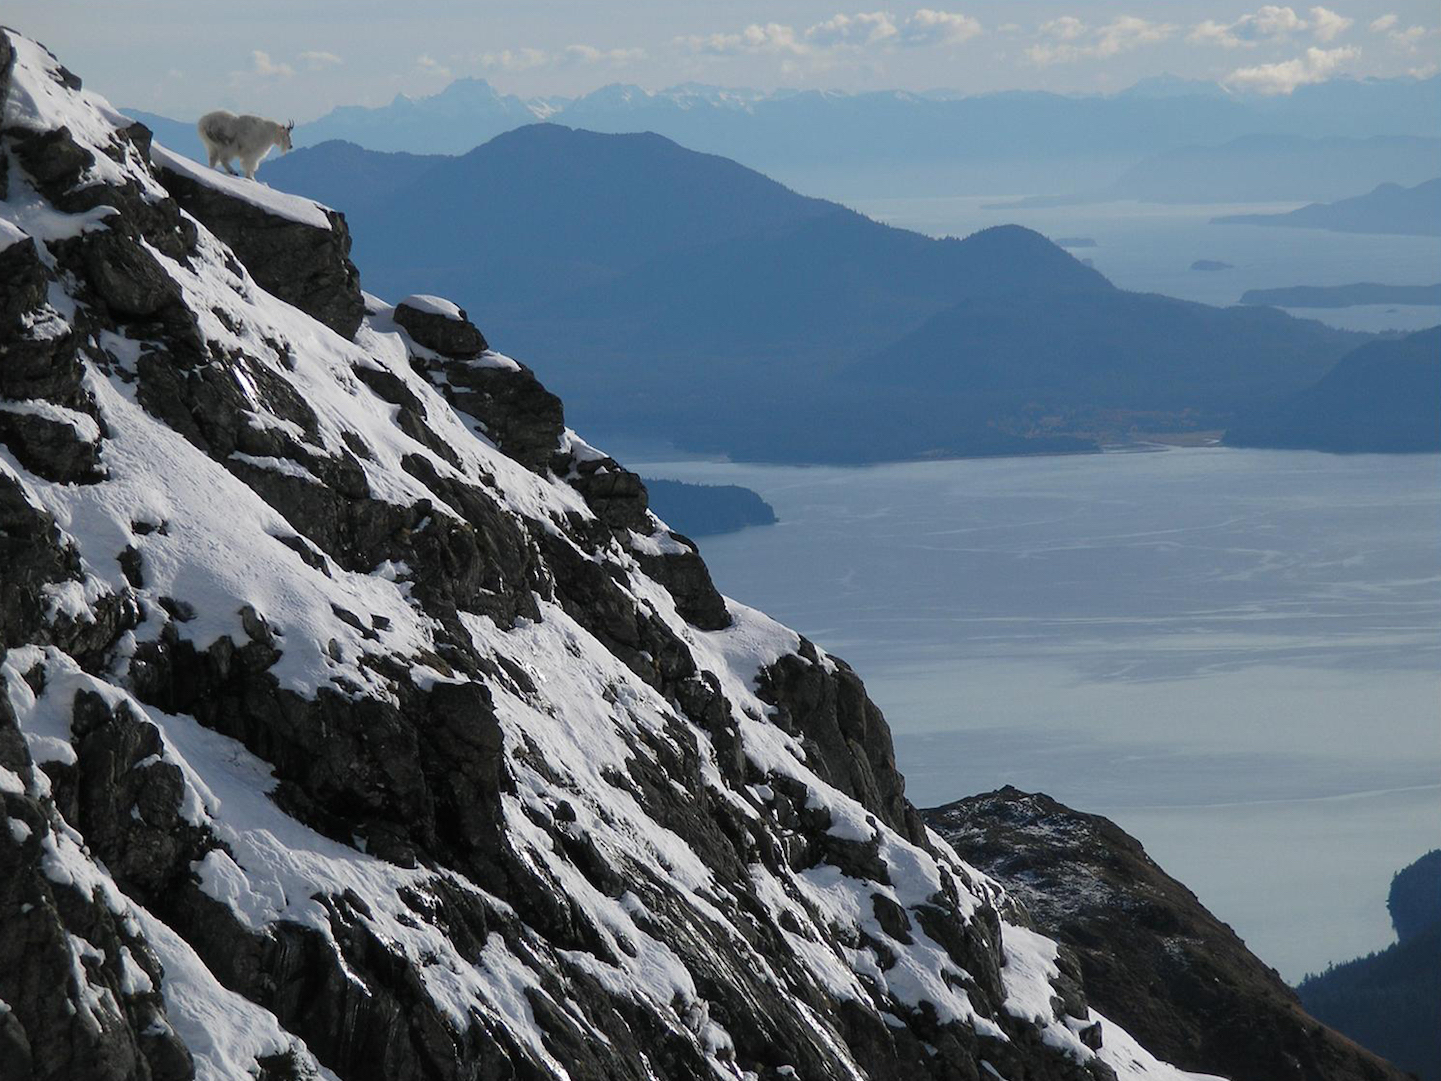 A female mountain goat seen from a distance standing near the top of a rocky slope, with a large body of water in the distance